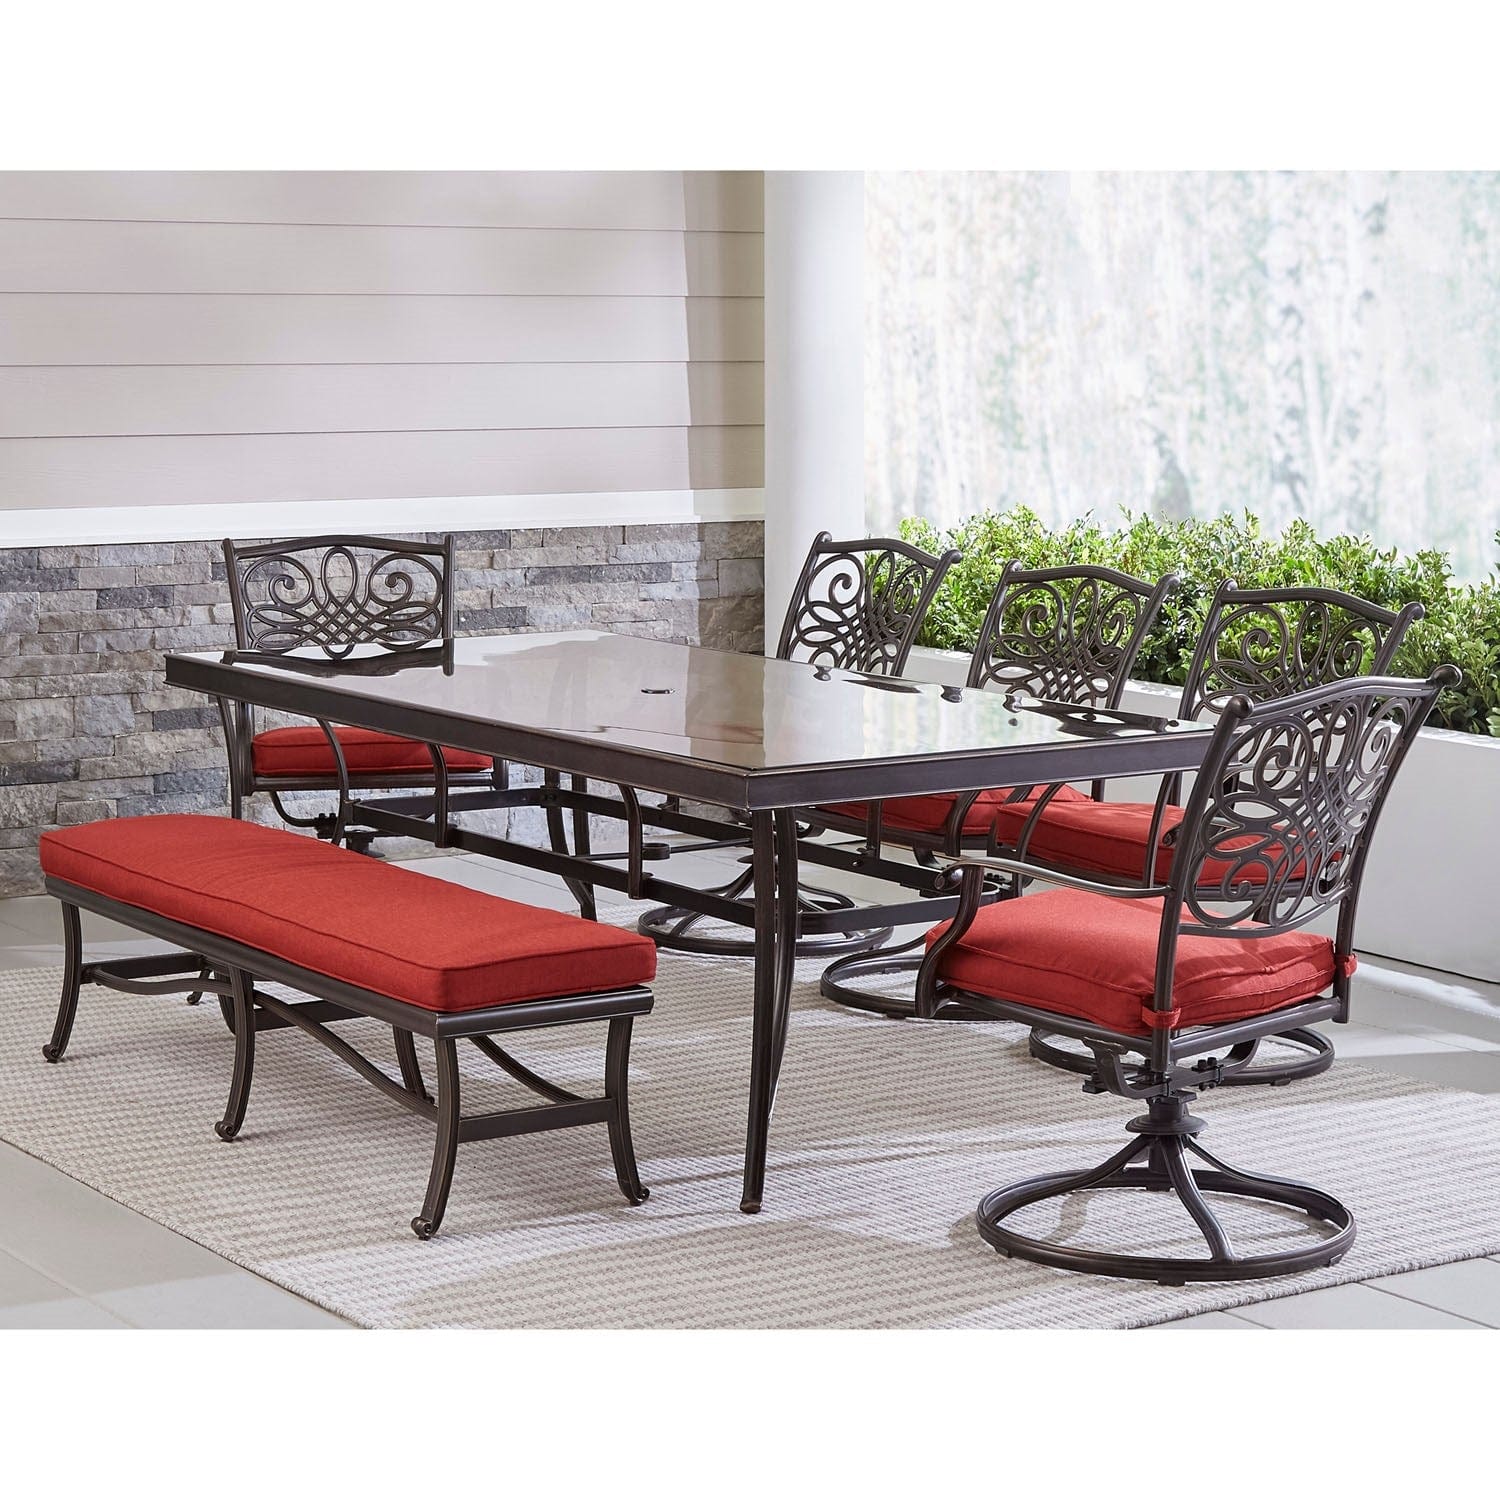 Hanover Outdoor Dining Set Hanover - Traditions 7-Piece Outdoor Dining Set in Red with 5 Swivel Rockers, a Cushioned Bench, and a 42" x 84" Glass-Top Table - TRADDN7PCSW5GBN-RED